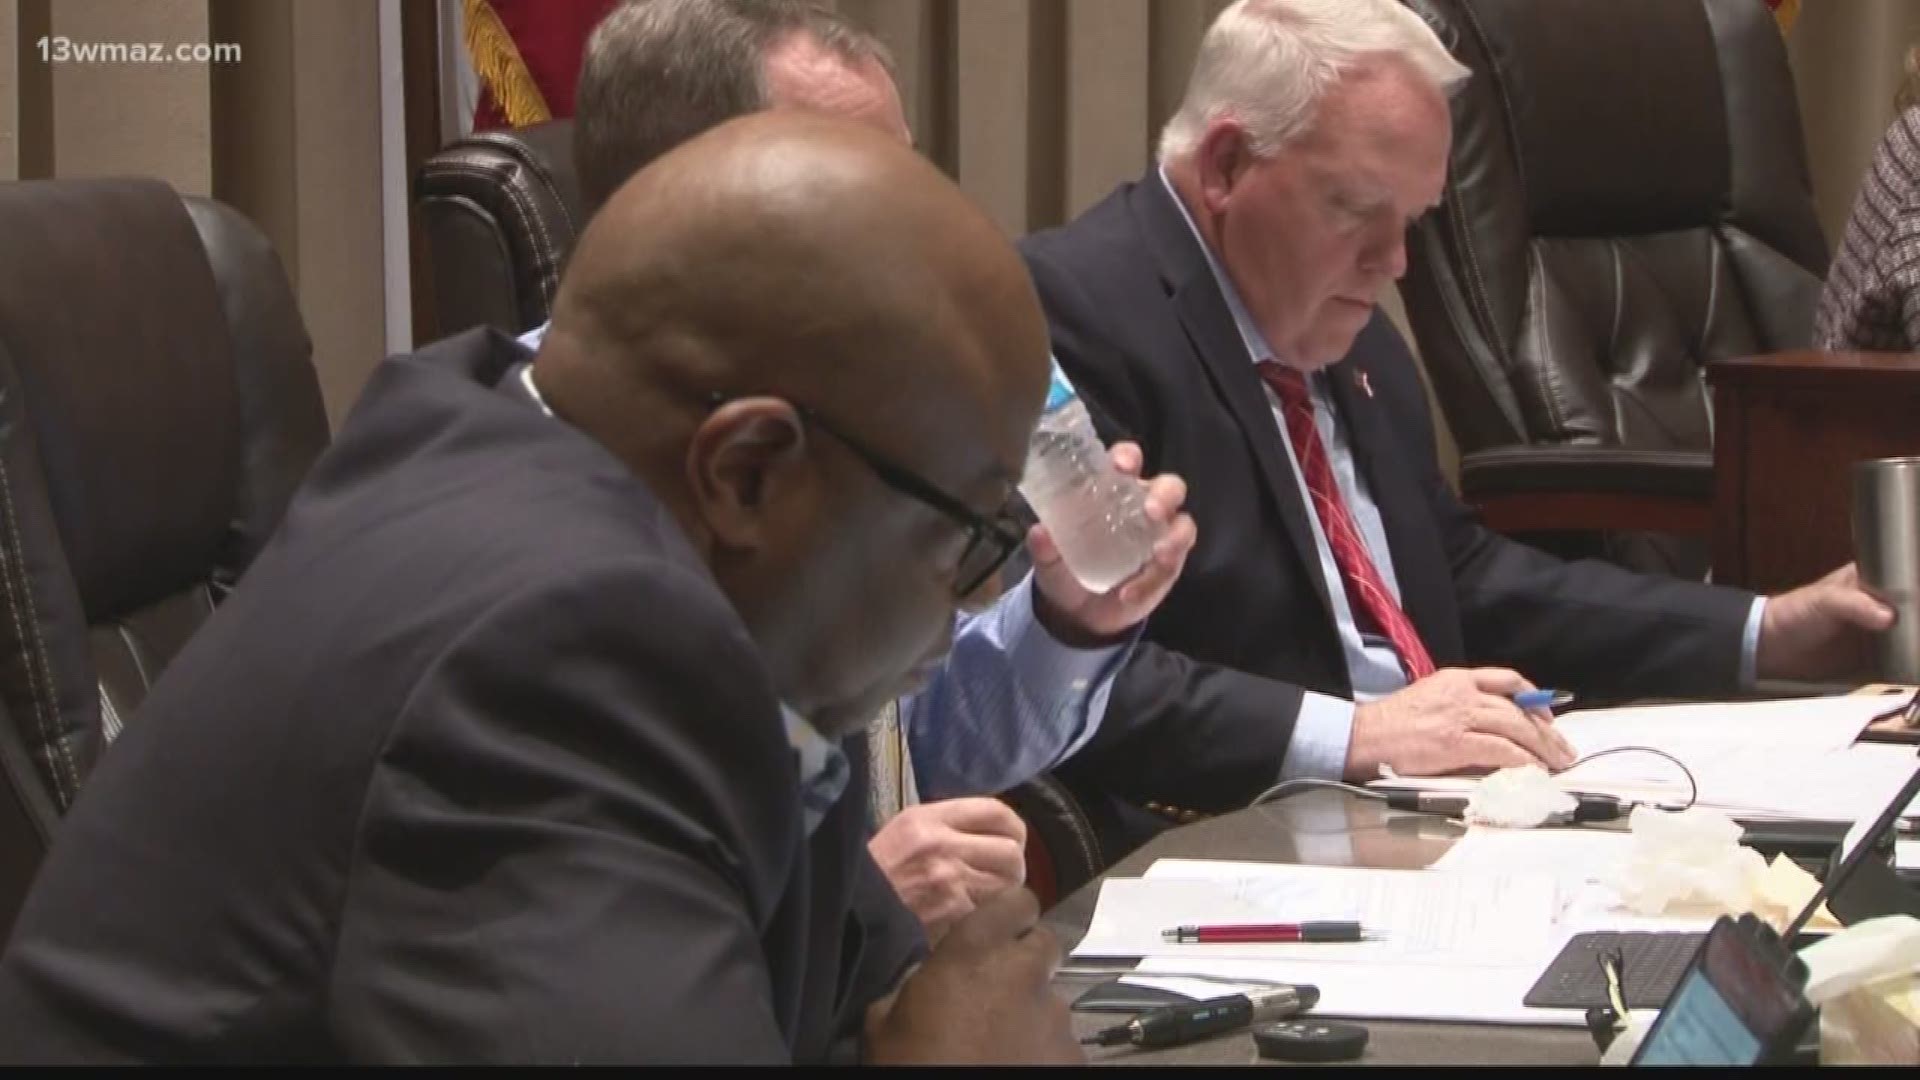 Warner Robins city leaders met tonight to appoint a new city attorney and decide on whether to move forward with a Perkins Field housing project.